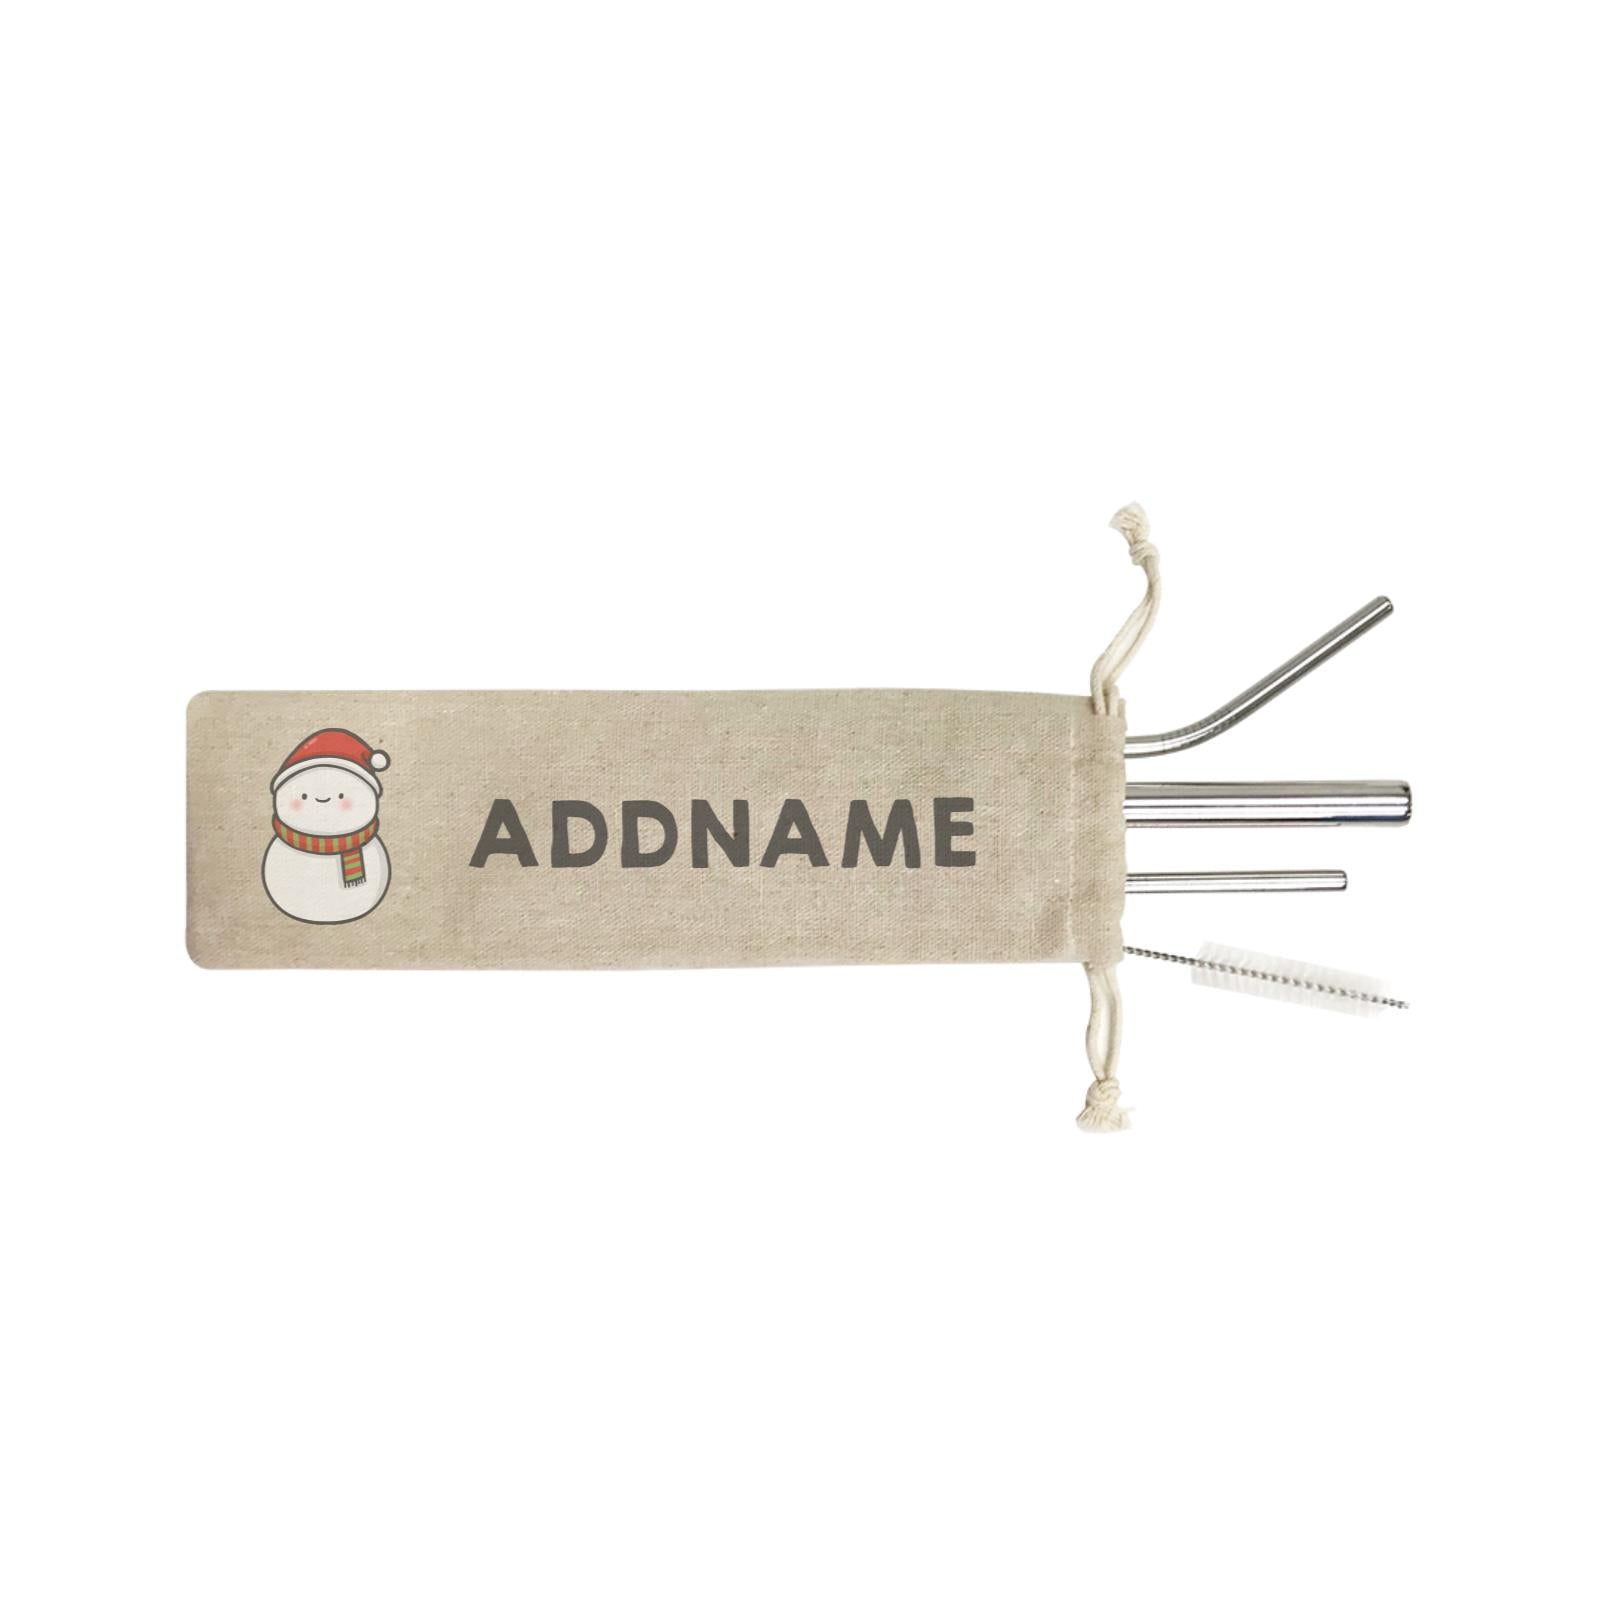 Xmas Cute Snowman Facing Foward Addname SB 4-in-1 Stainless Steel Straw Set In a Satchel